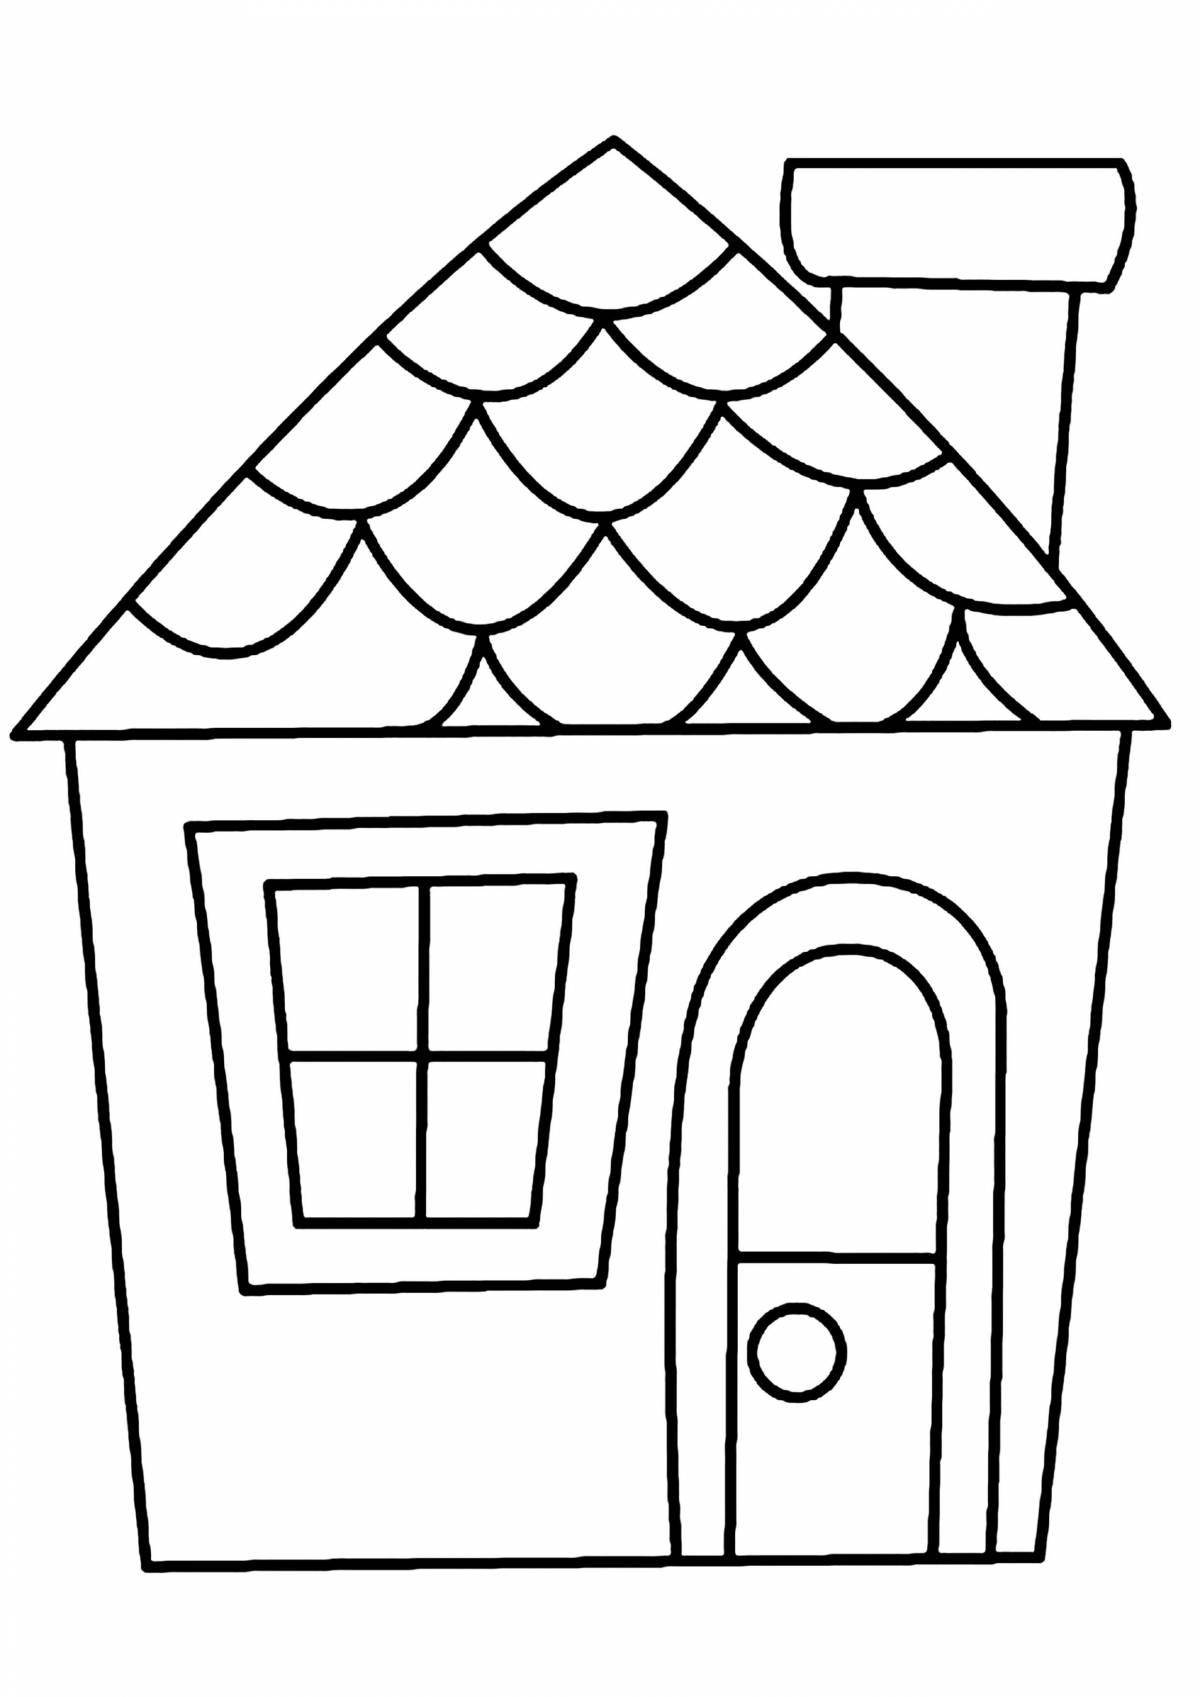 Coloring book pretty little house